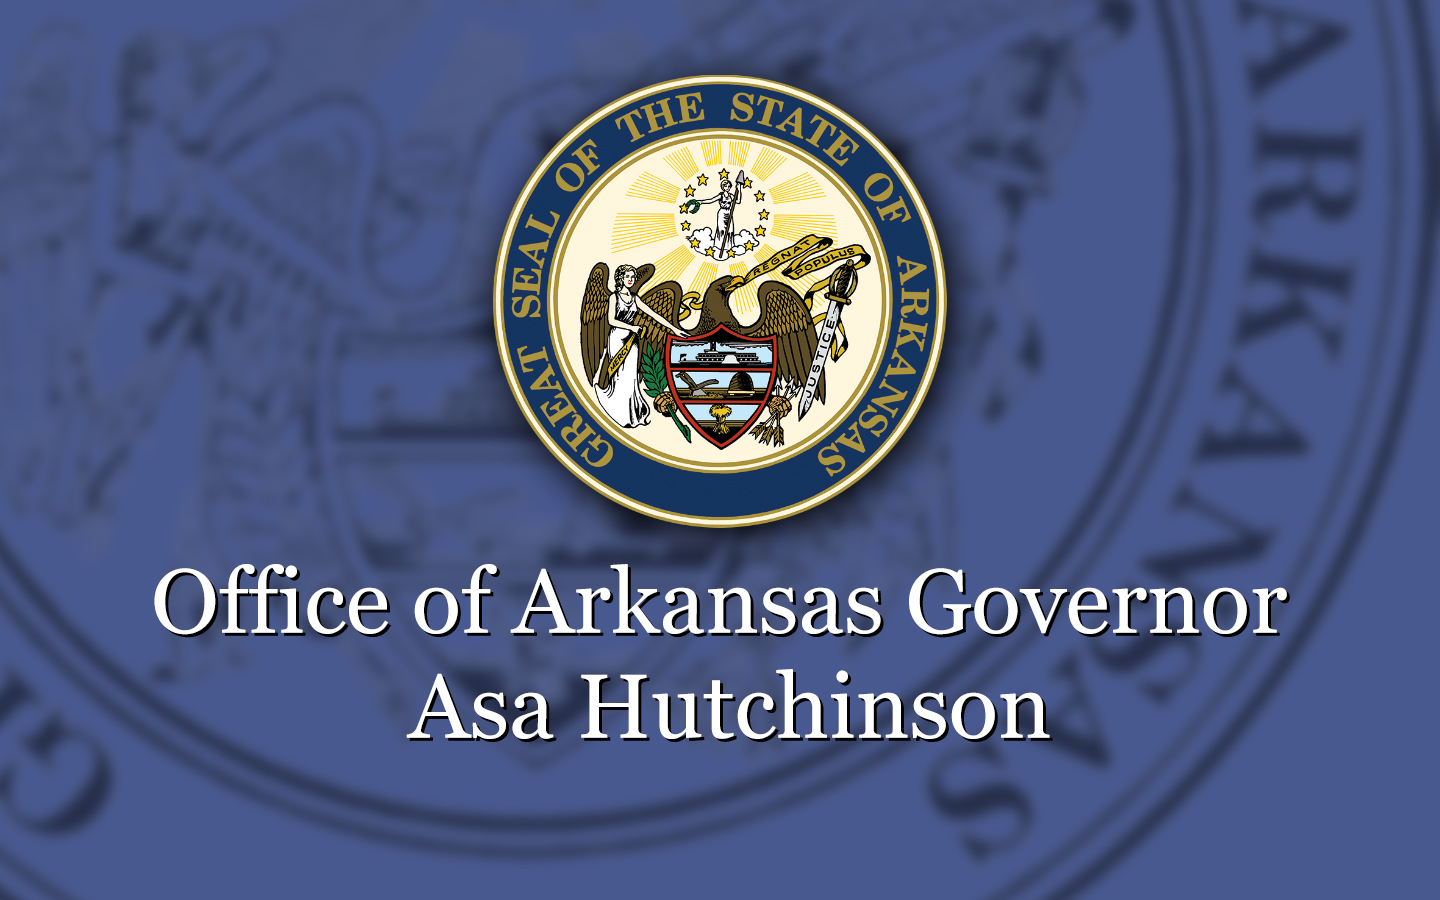 Governor Hutchinson Discusses Plans For Improving Lives of Children, Maternal